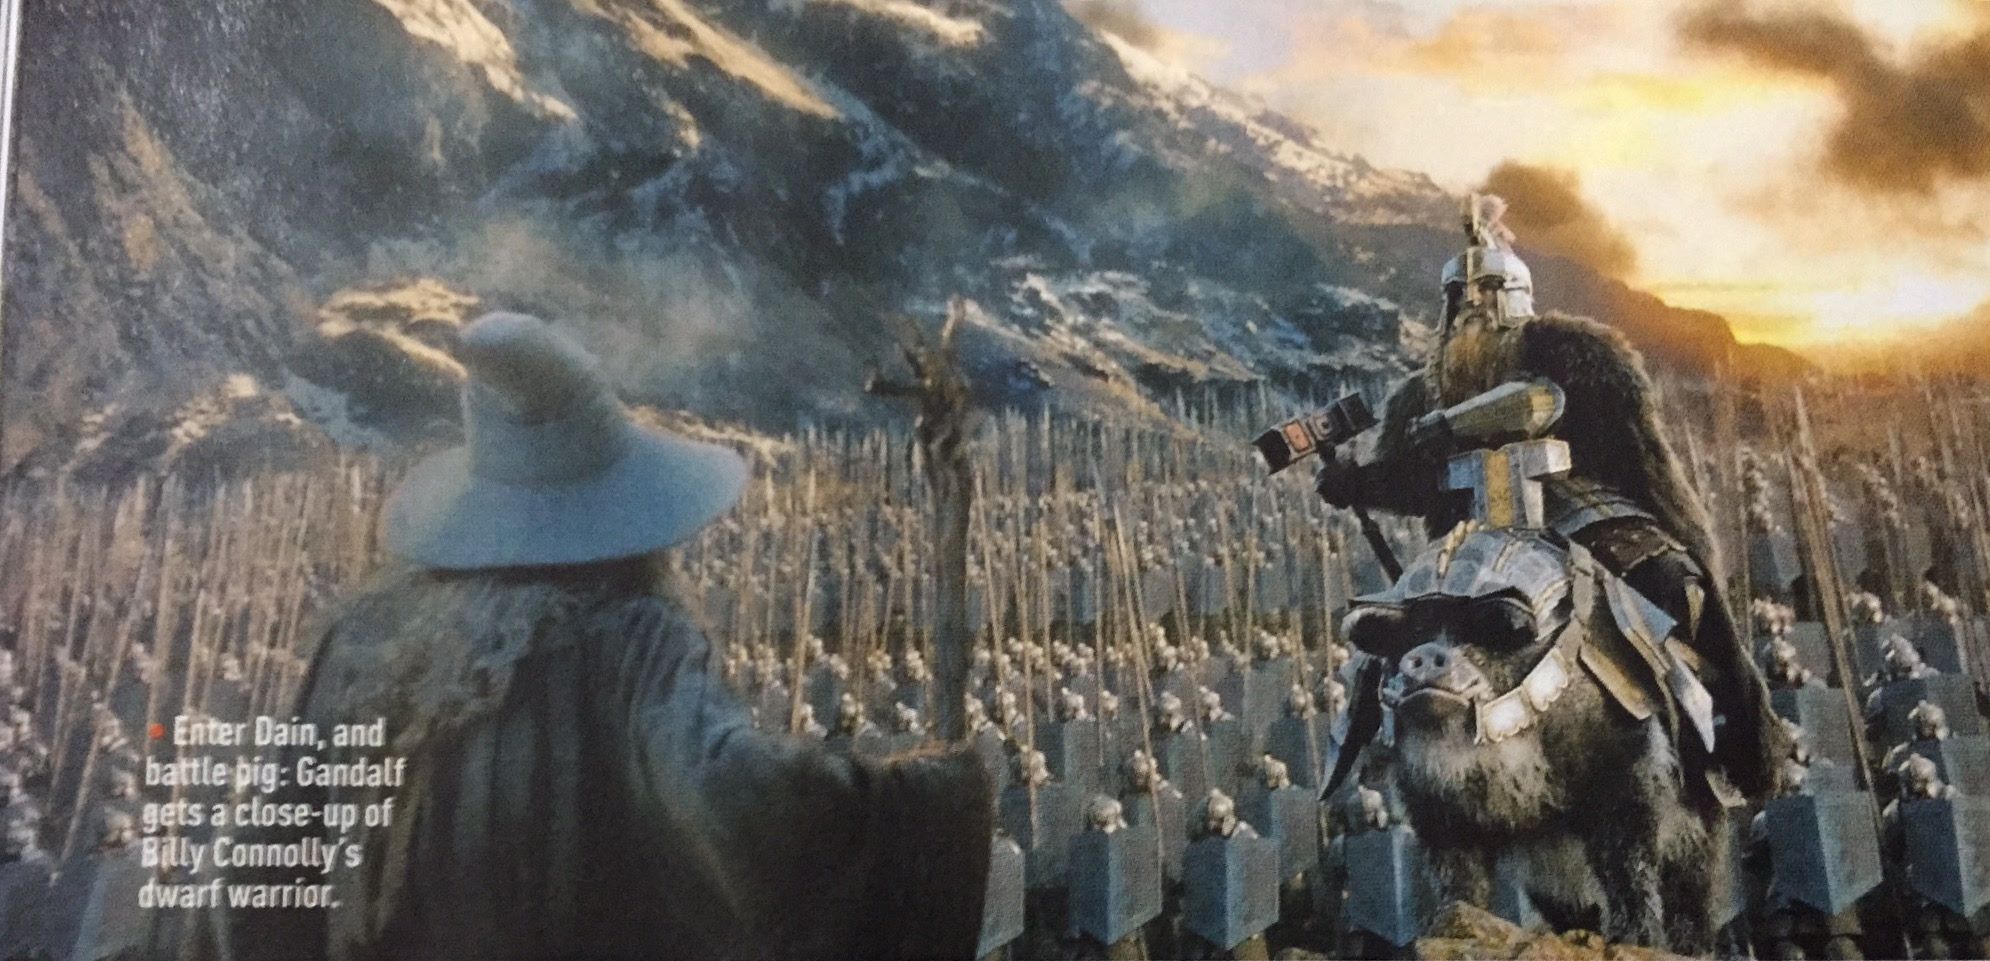 The Hobbit: The Battle of the Five Armies Photo 5